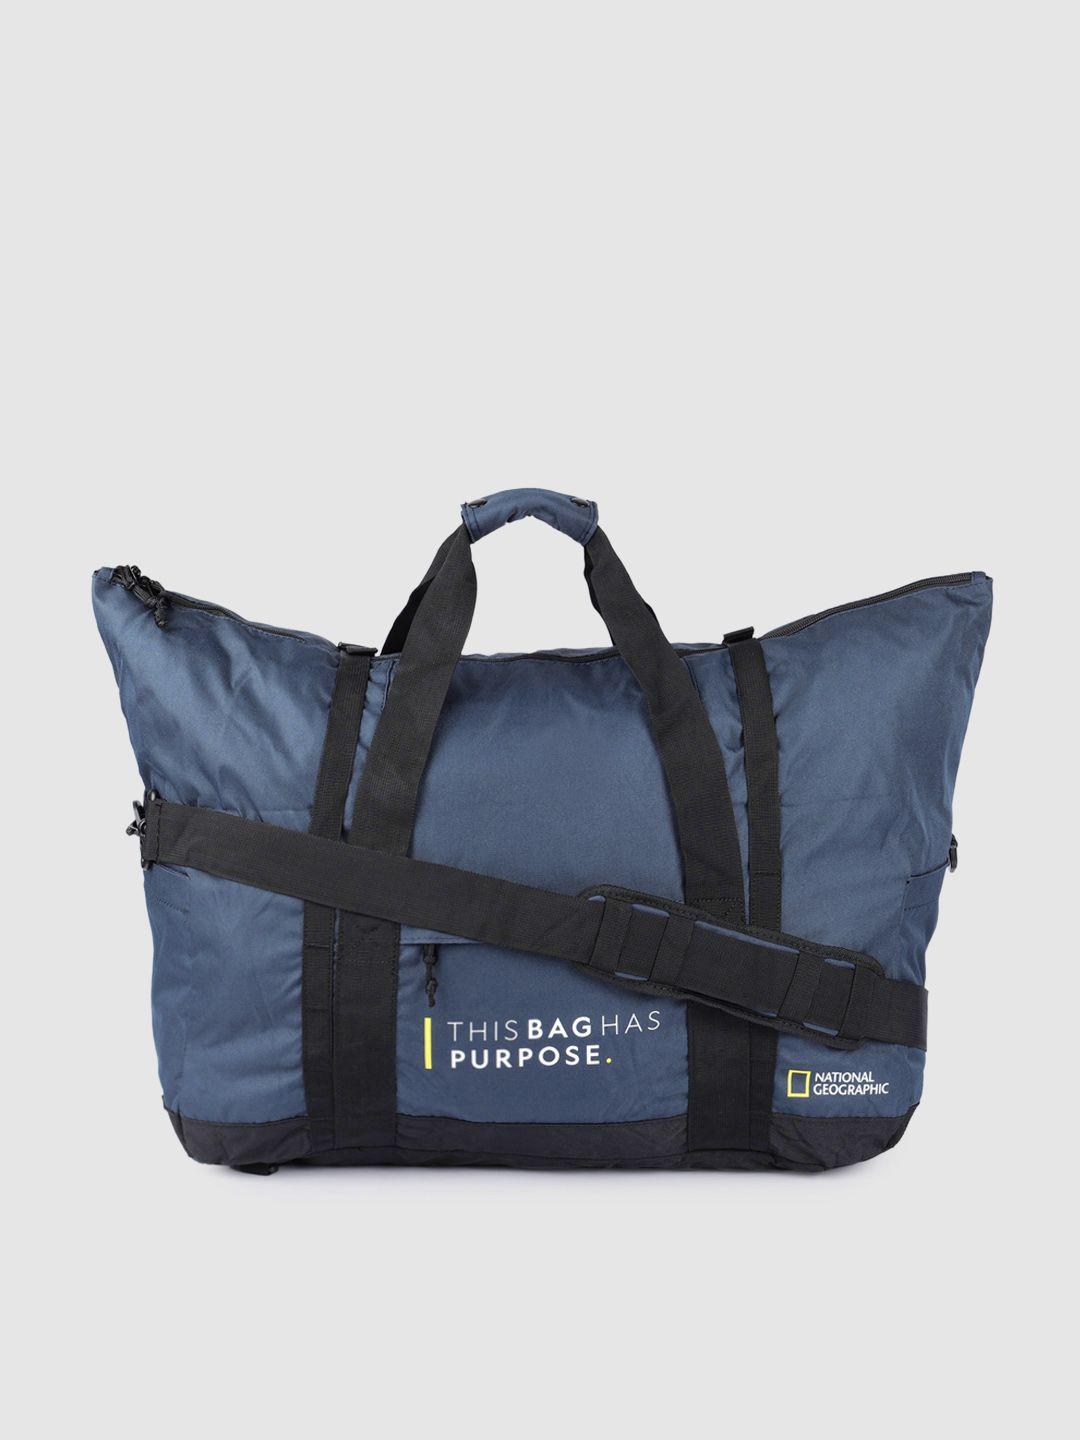 national geographic unisex navy blue typography duffle bag